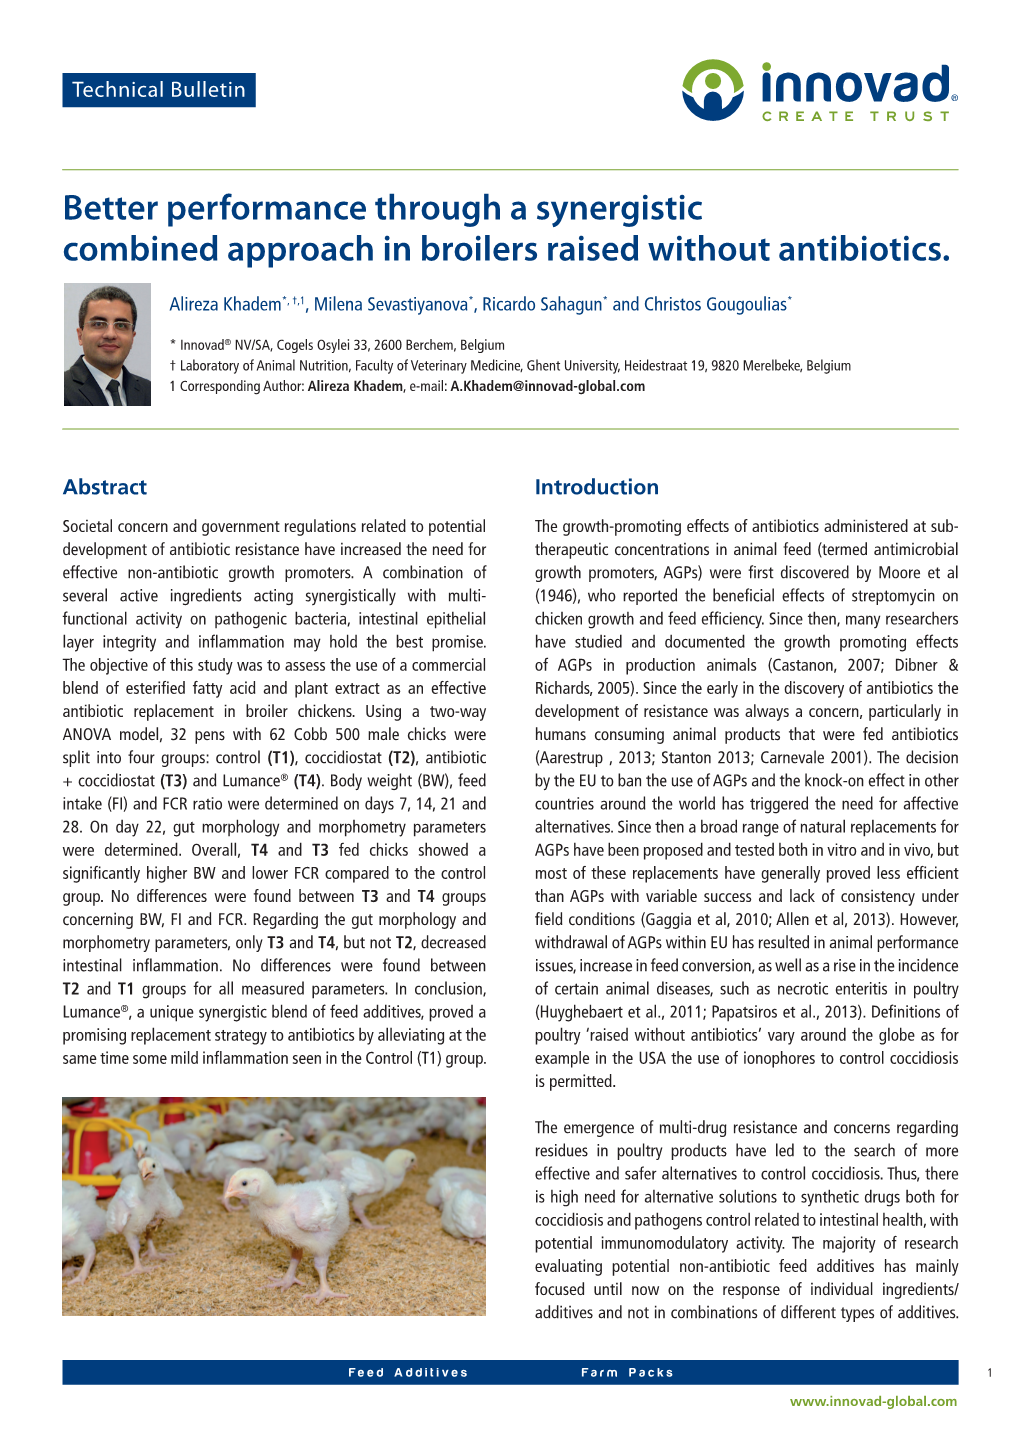 Better Performance Through a Synergistic Combined Approach in Broilers Raised Without Antibiotics